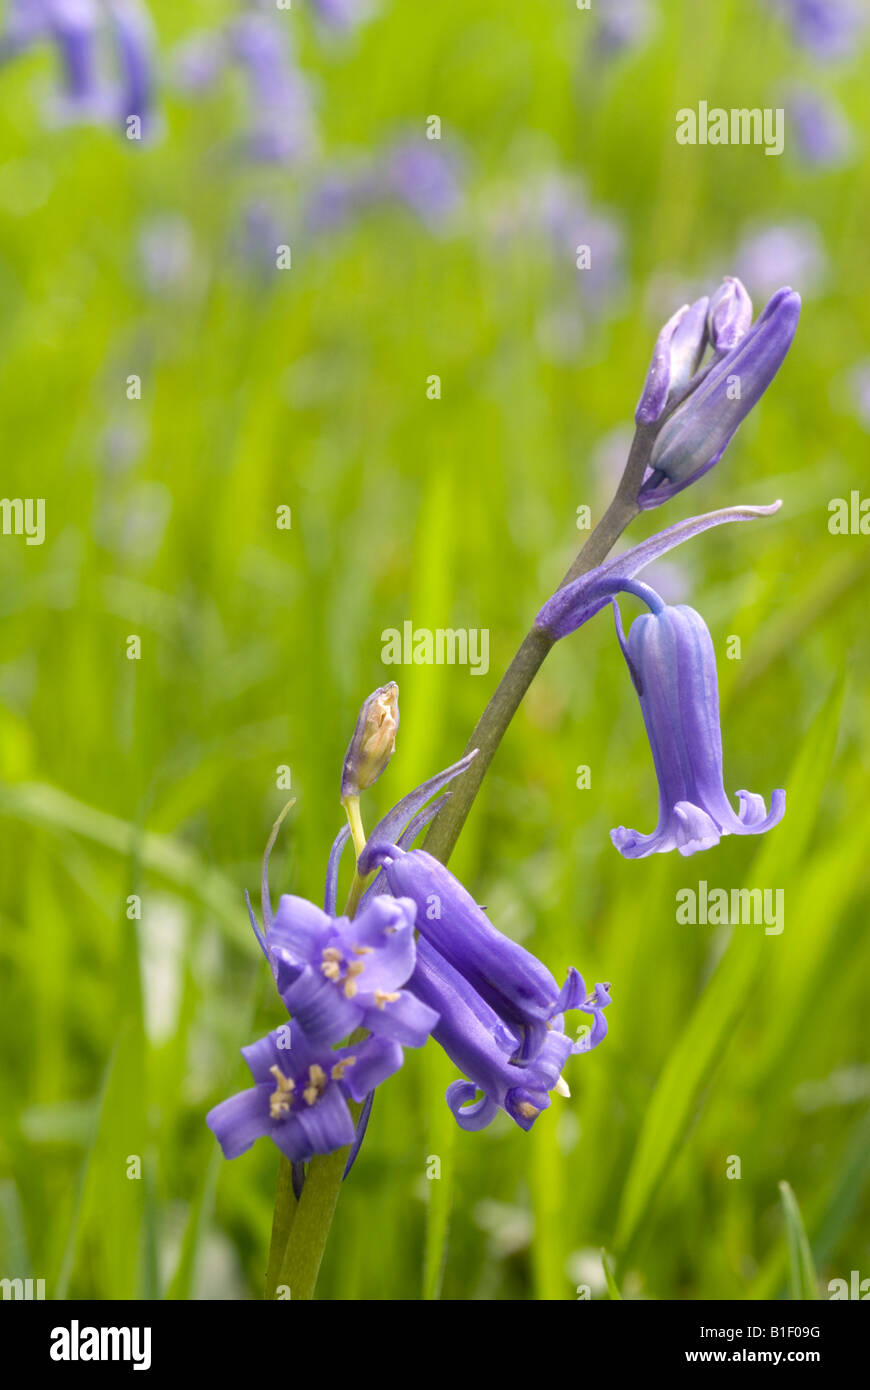 Close up of Common Bluebell flowers, Hyacinthoides non scripta, Oxley, Banque Bretton, West Yorkshire, Royaume-Uni Banque D'Images